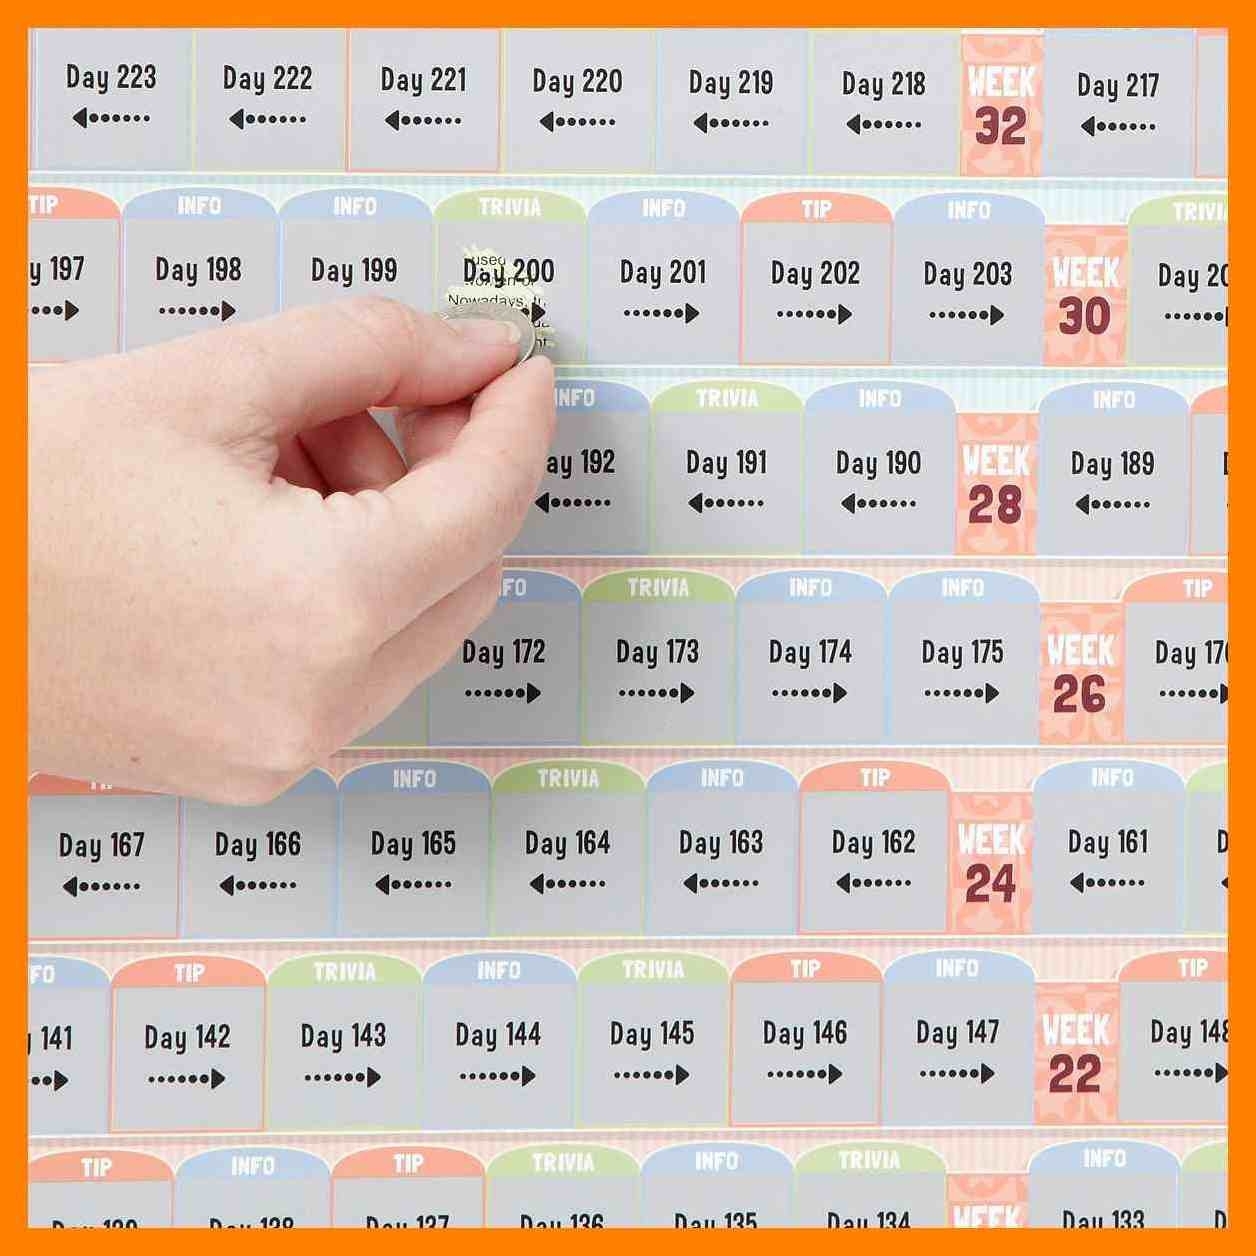 15+ Pregnancy Calendarday | Stretching And Conditioning with regard to Pregnancy Calendar Day By Day